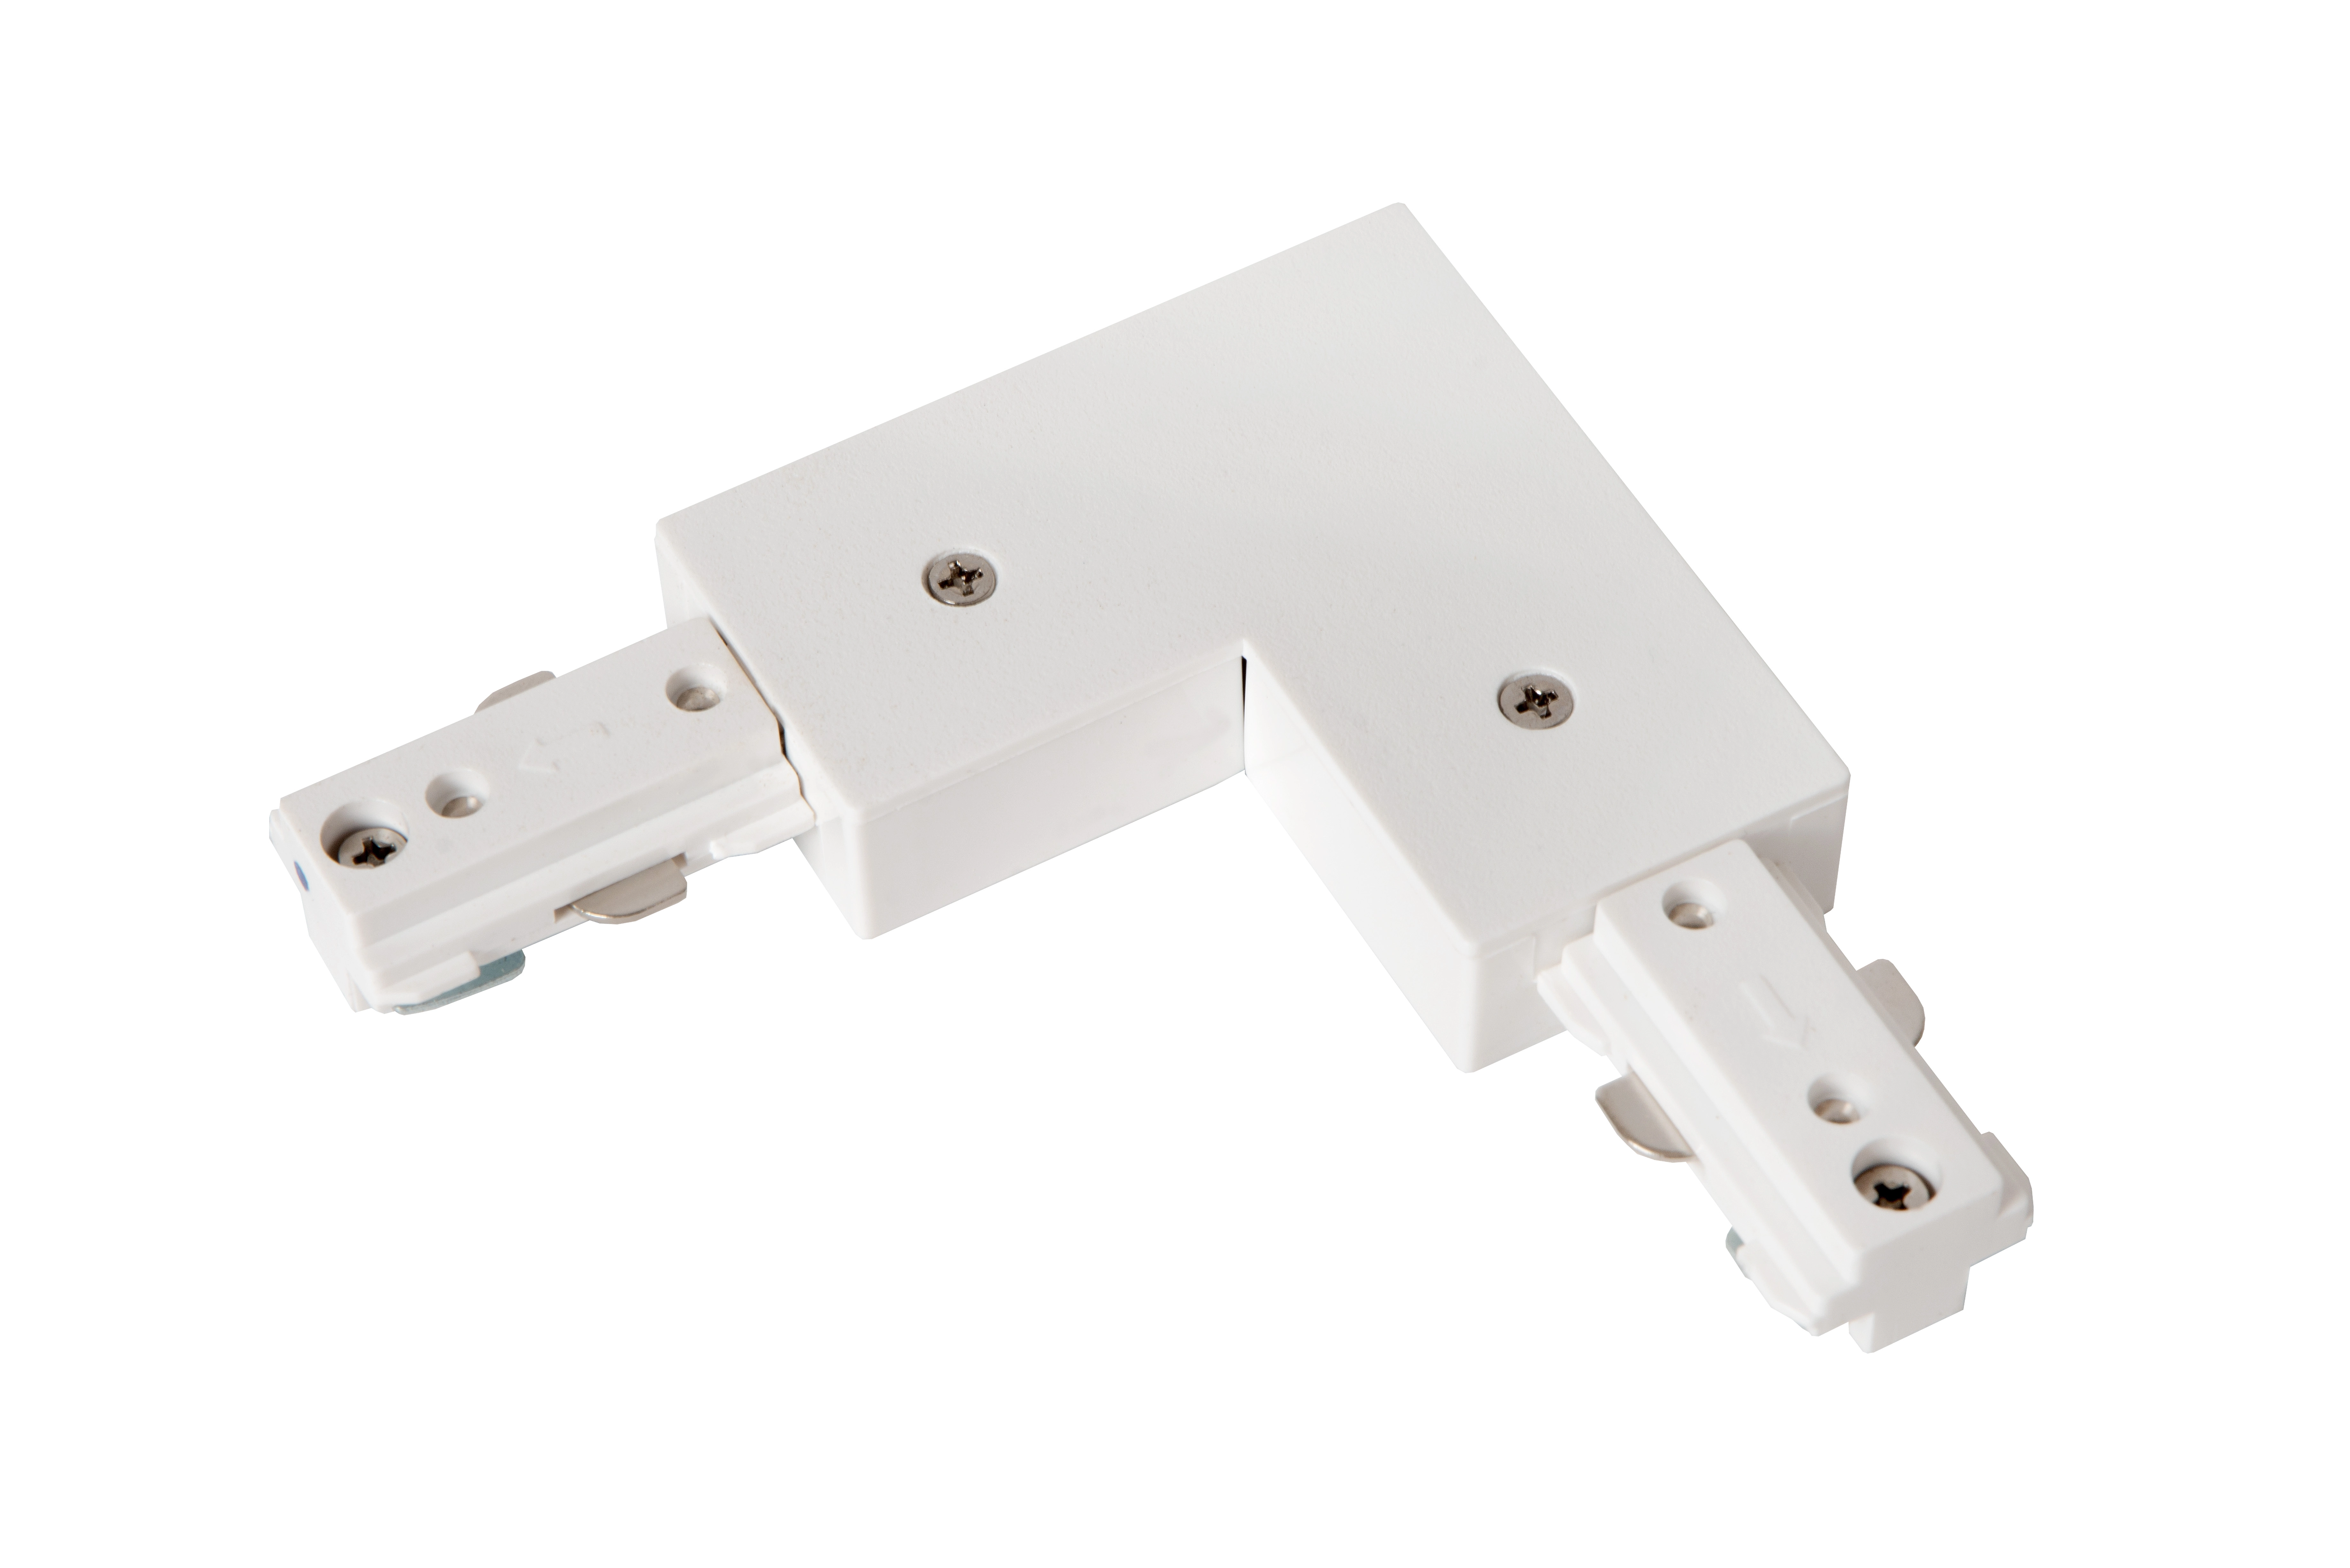 LU 09950/04/31 Lucide TRACK L-connector - 1-circuit Track lighting system - Right - White (Extension